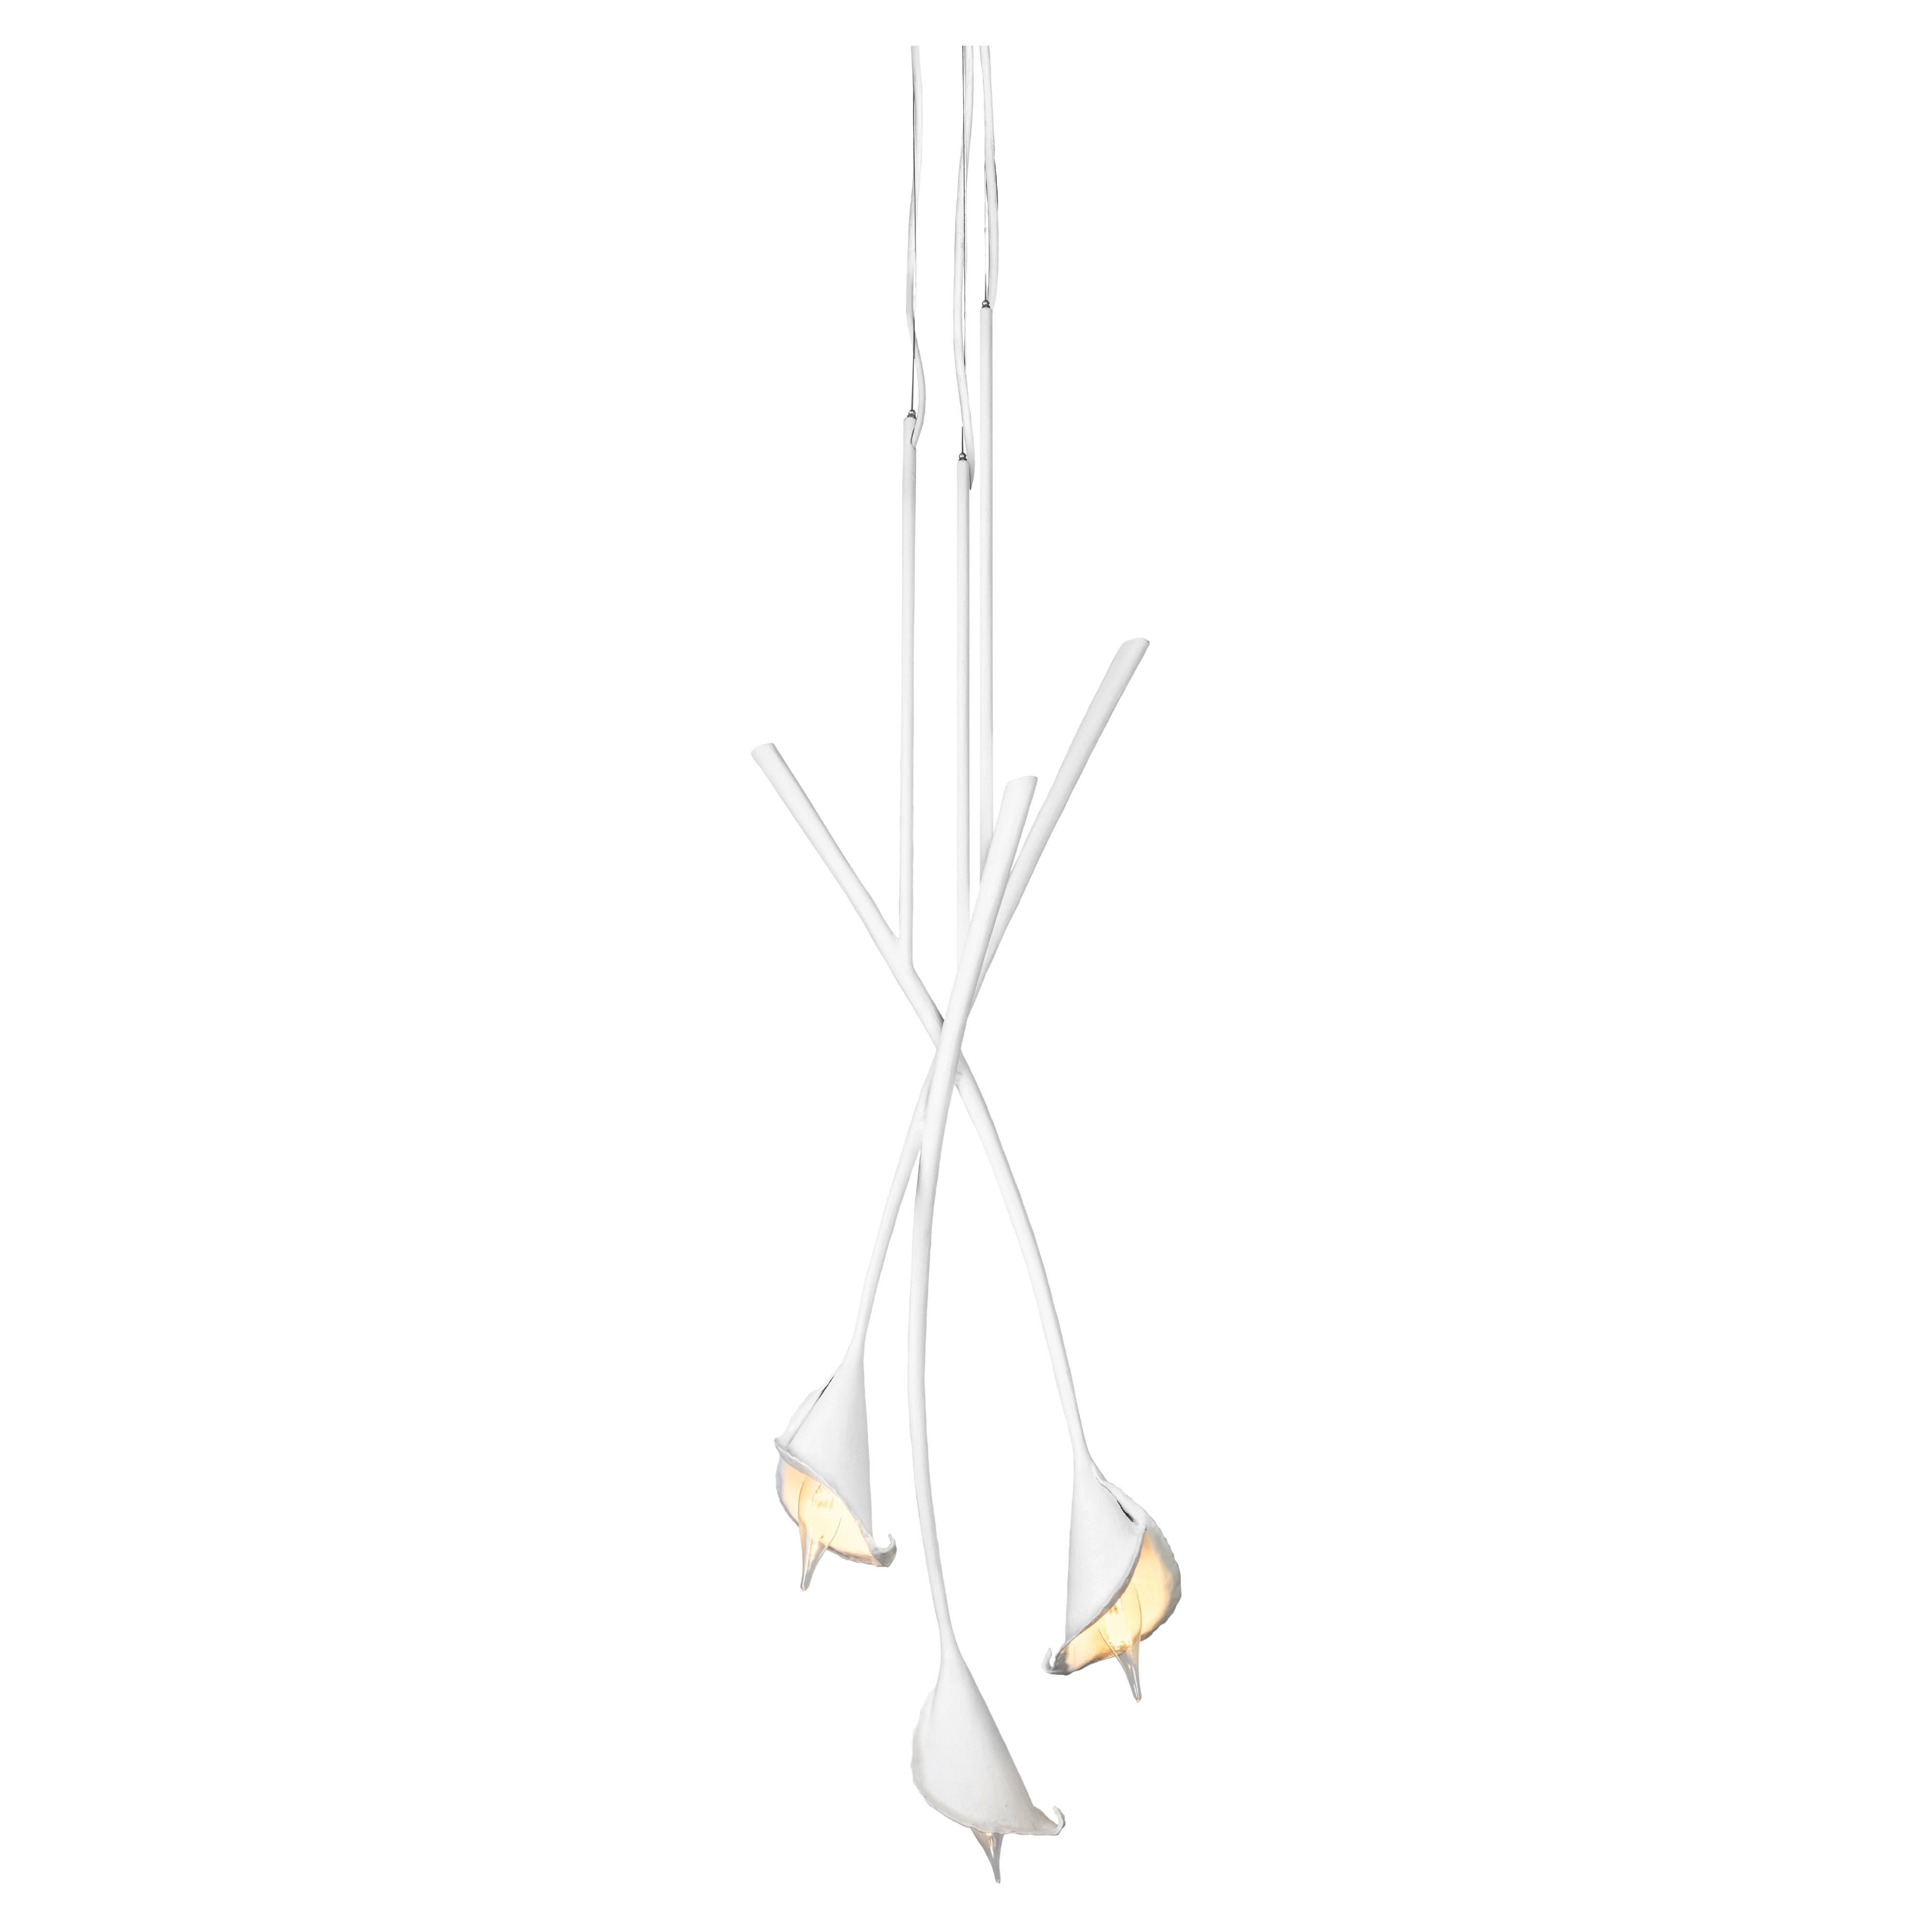 For a large space in need of a signature lighting object, the Calla Lily Chandelier is a good option. It sets out to dominate through its sheer size and form.
Hand-sculpted  in white plaster, you can use them by itself or combine them to fit your